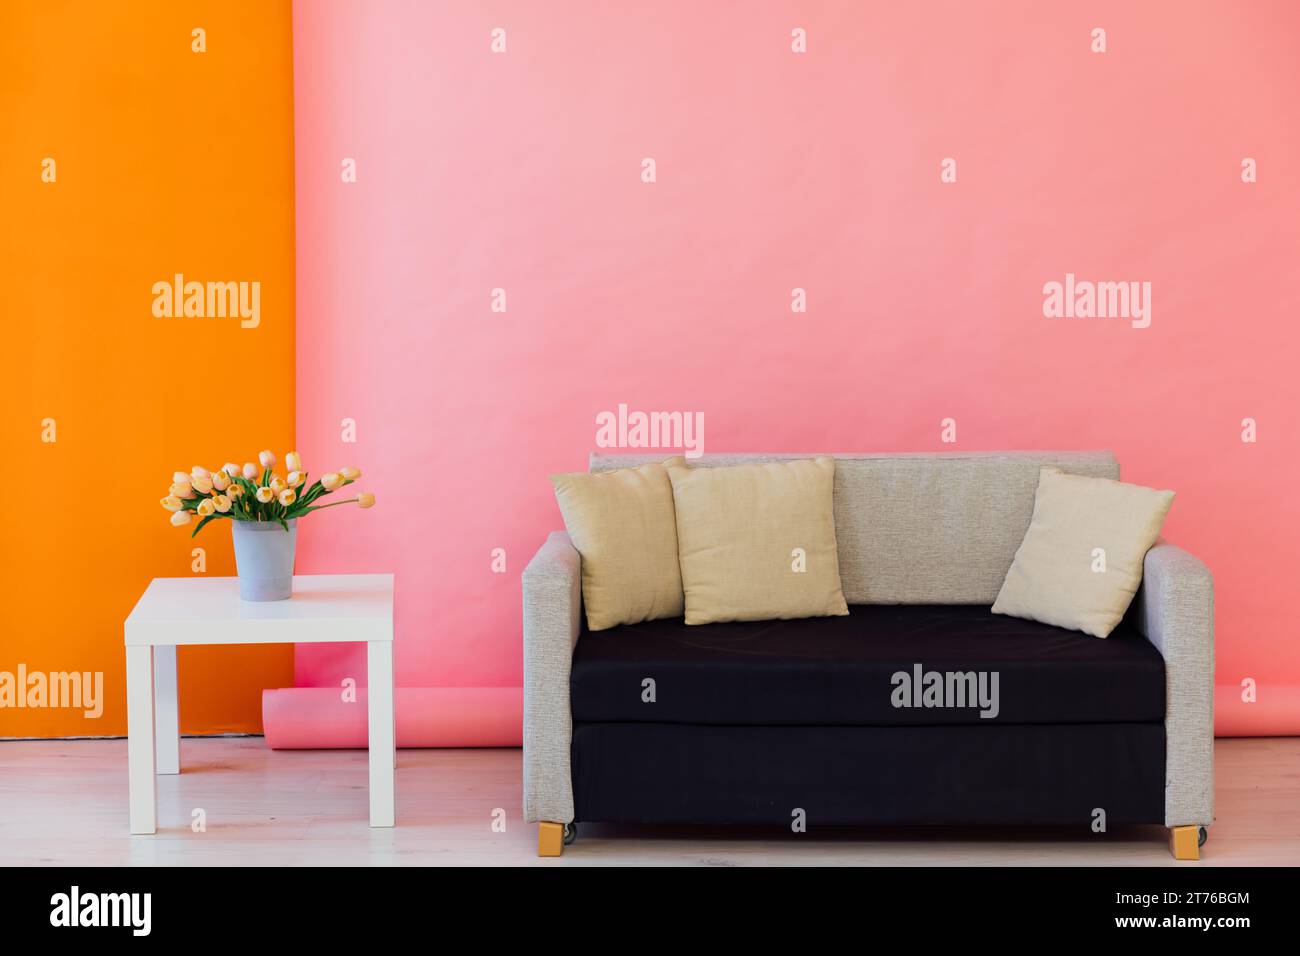 Pink orange room interior with grey office sofa and flowers Stock Photo